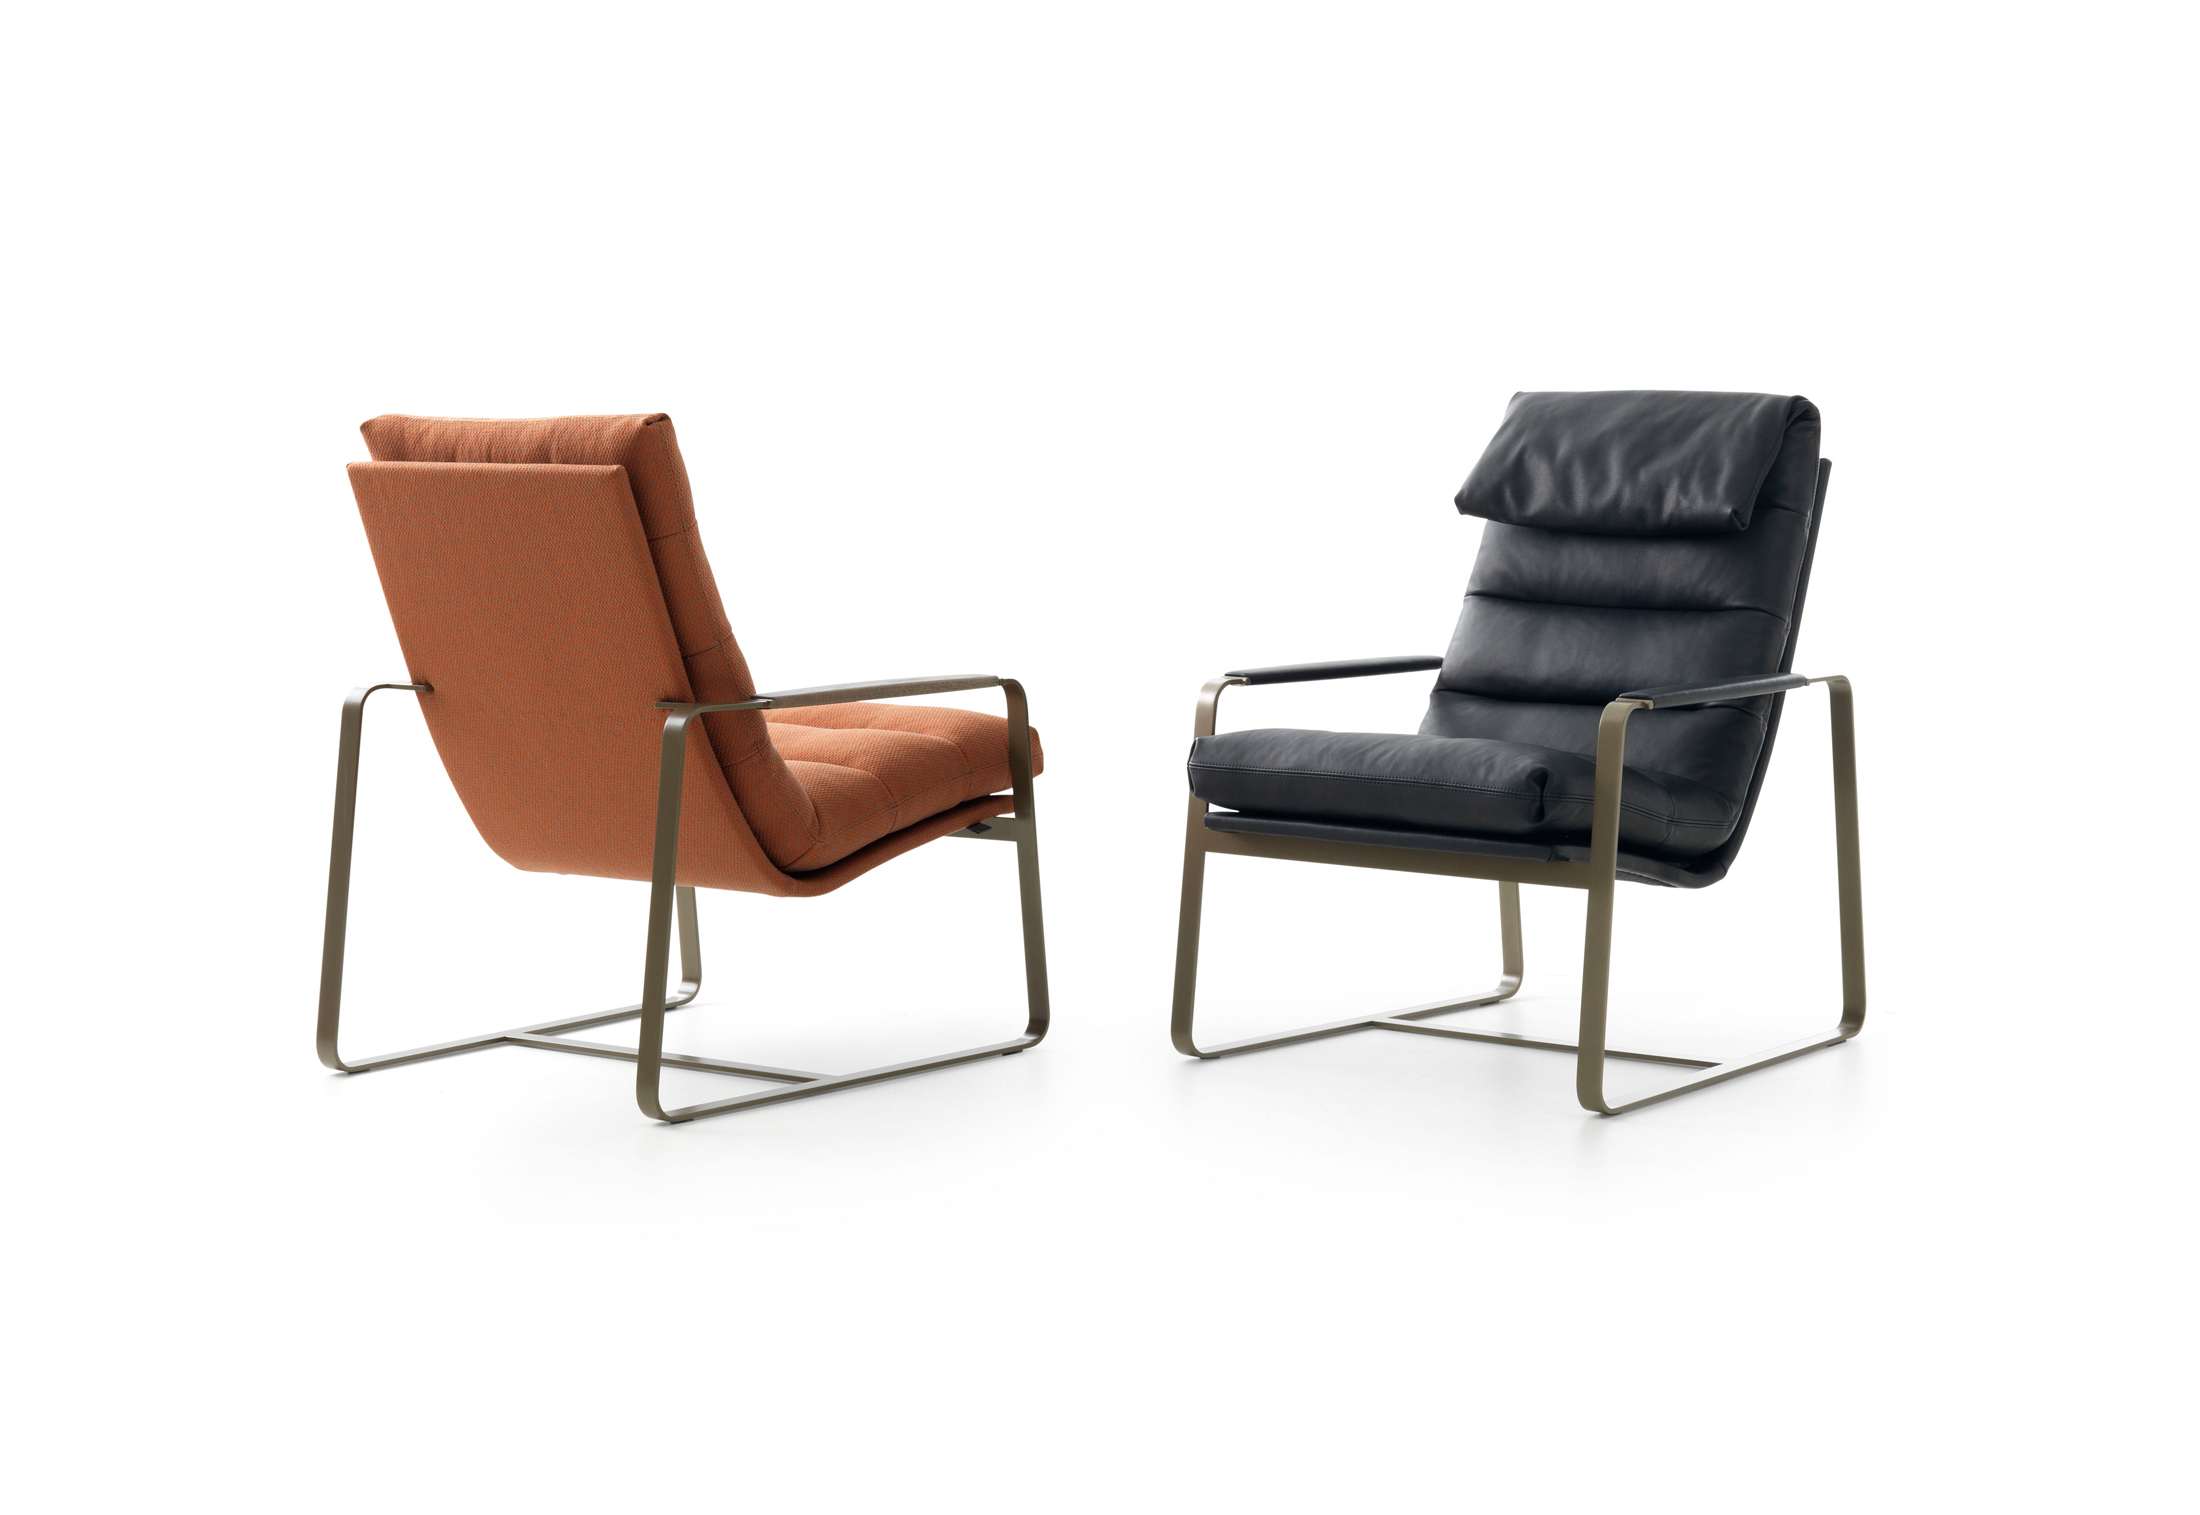 Indra Pure Chairs by Cuno Frommherz for Leolux